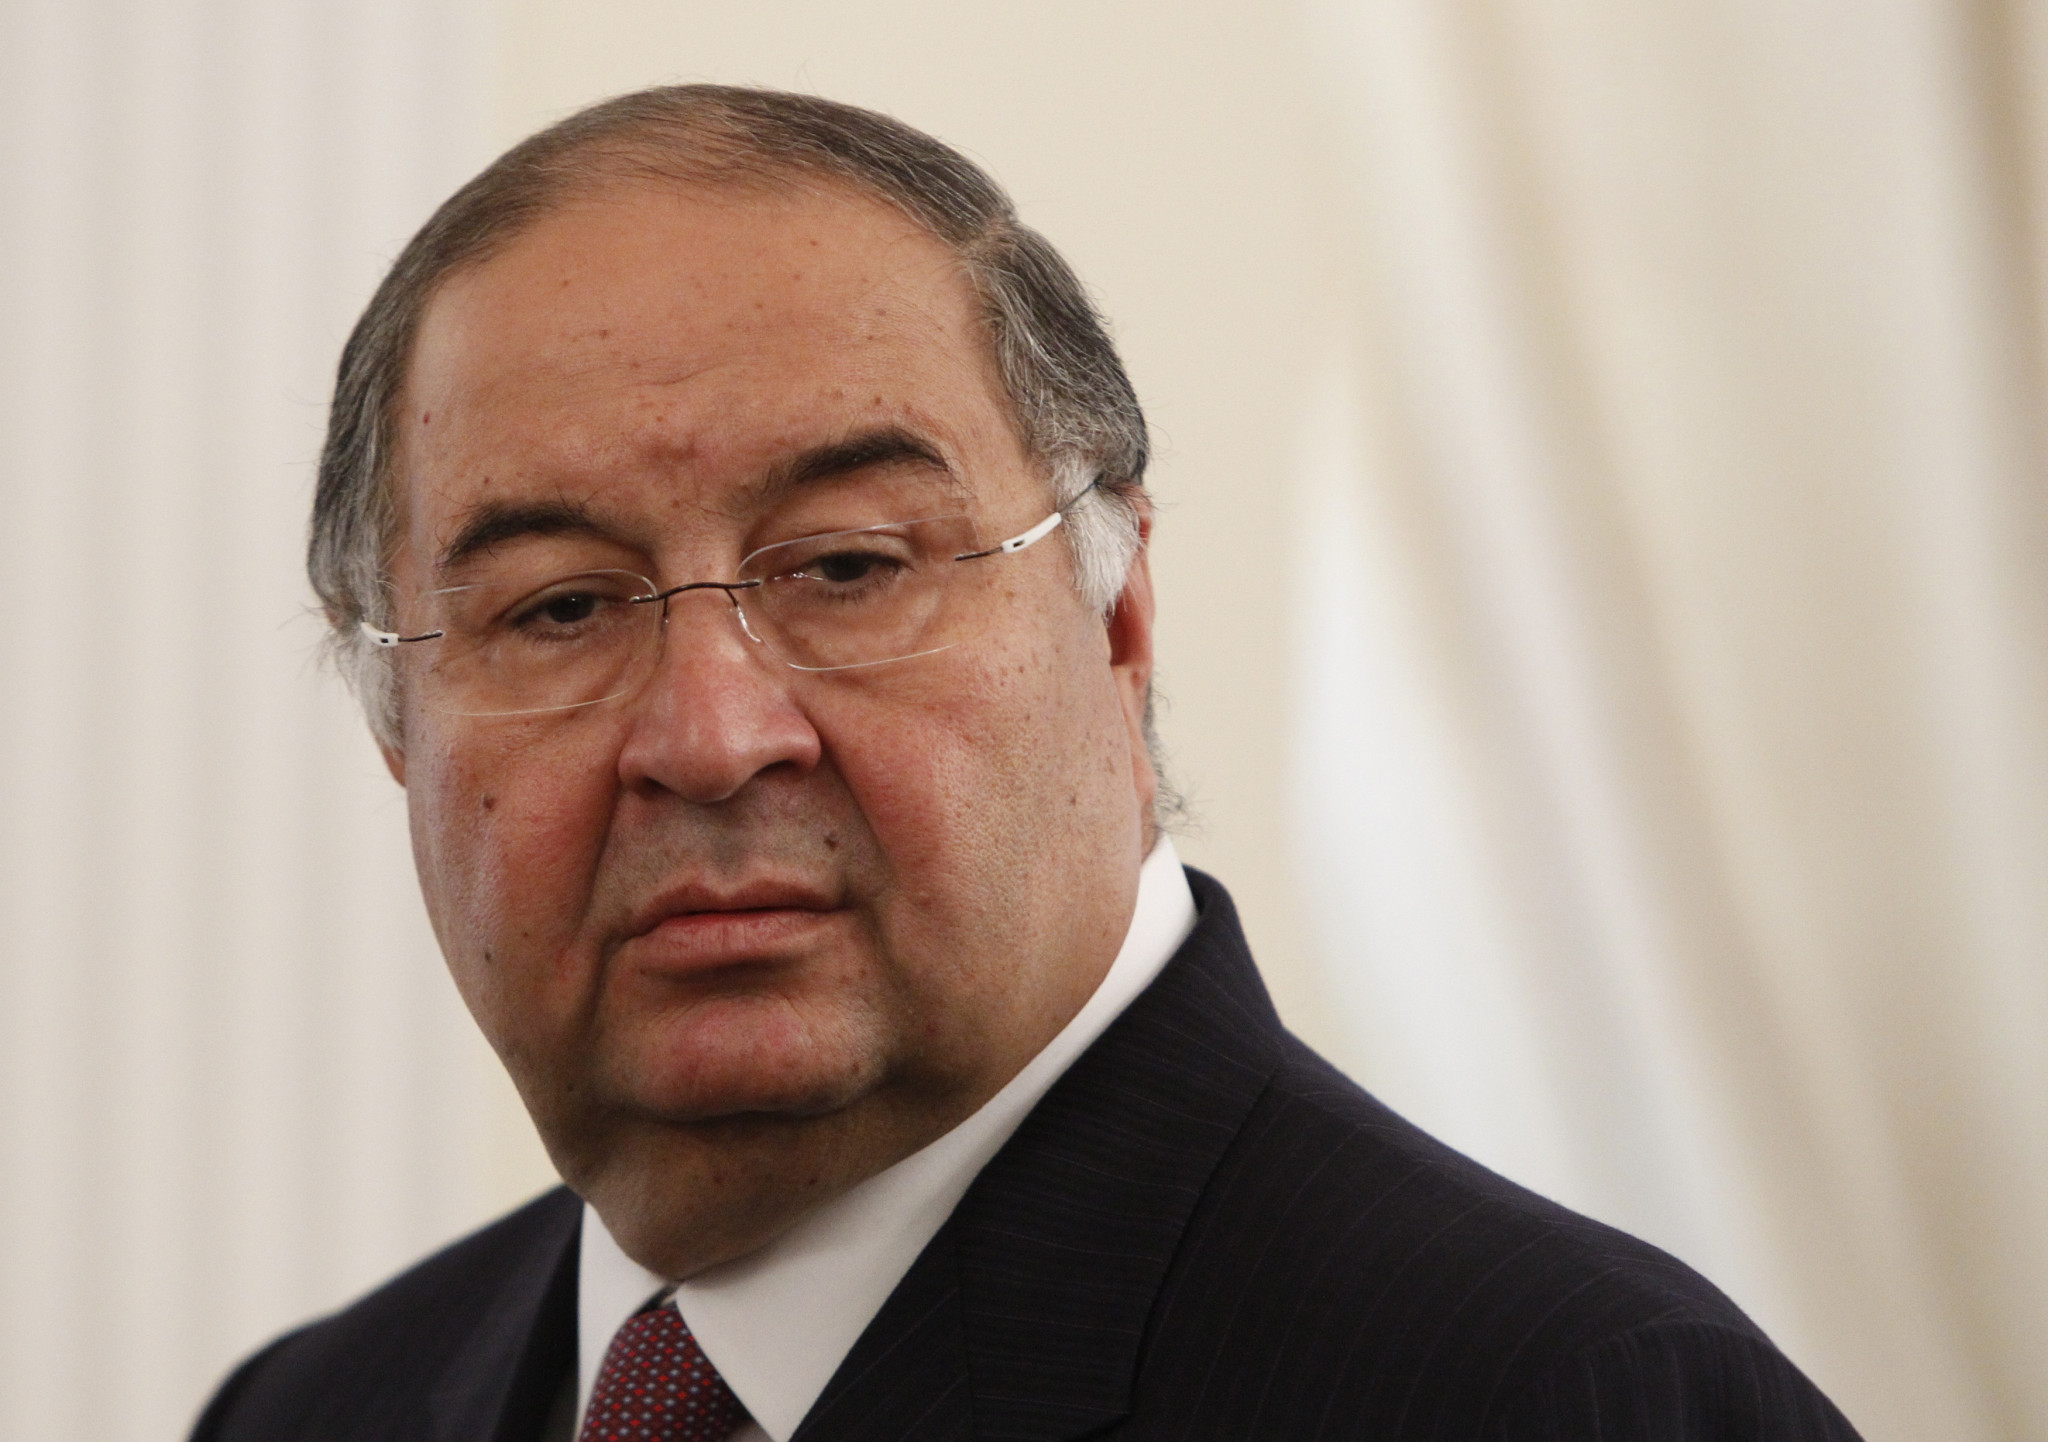 Usmanov hit with sanctions by UK Government as status of his multi-million-dollar yacht remains uncertain